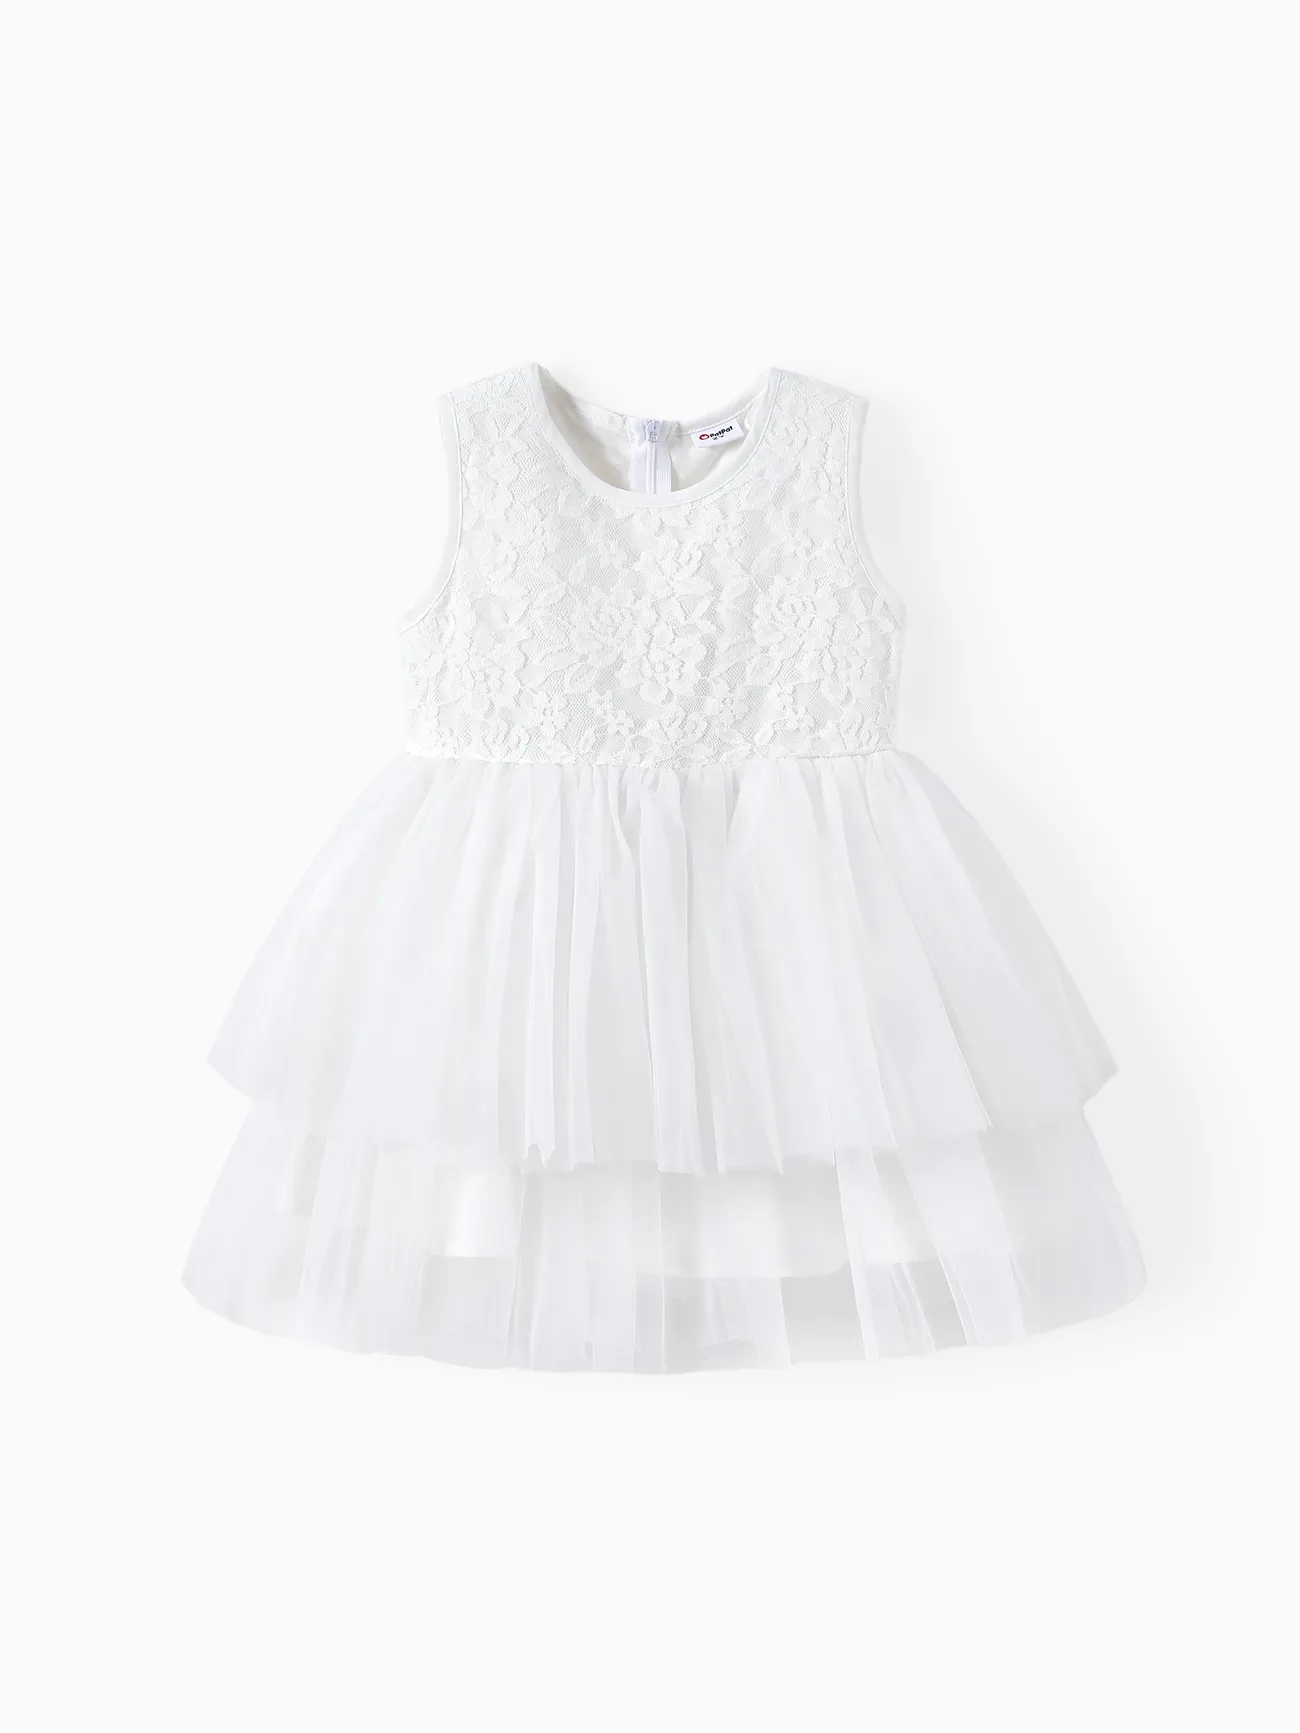 Toddler Girl Double-layered Mesh Floral Lace Tulle Dress White big image 1